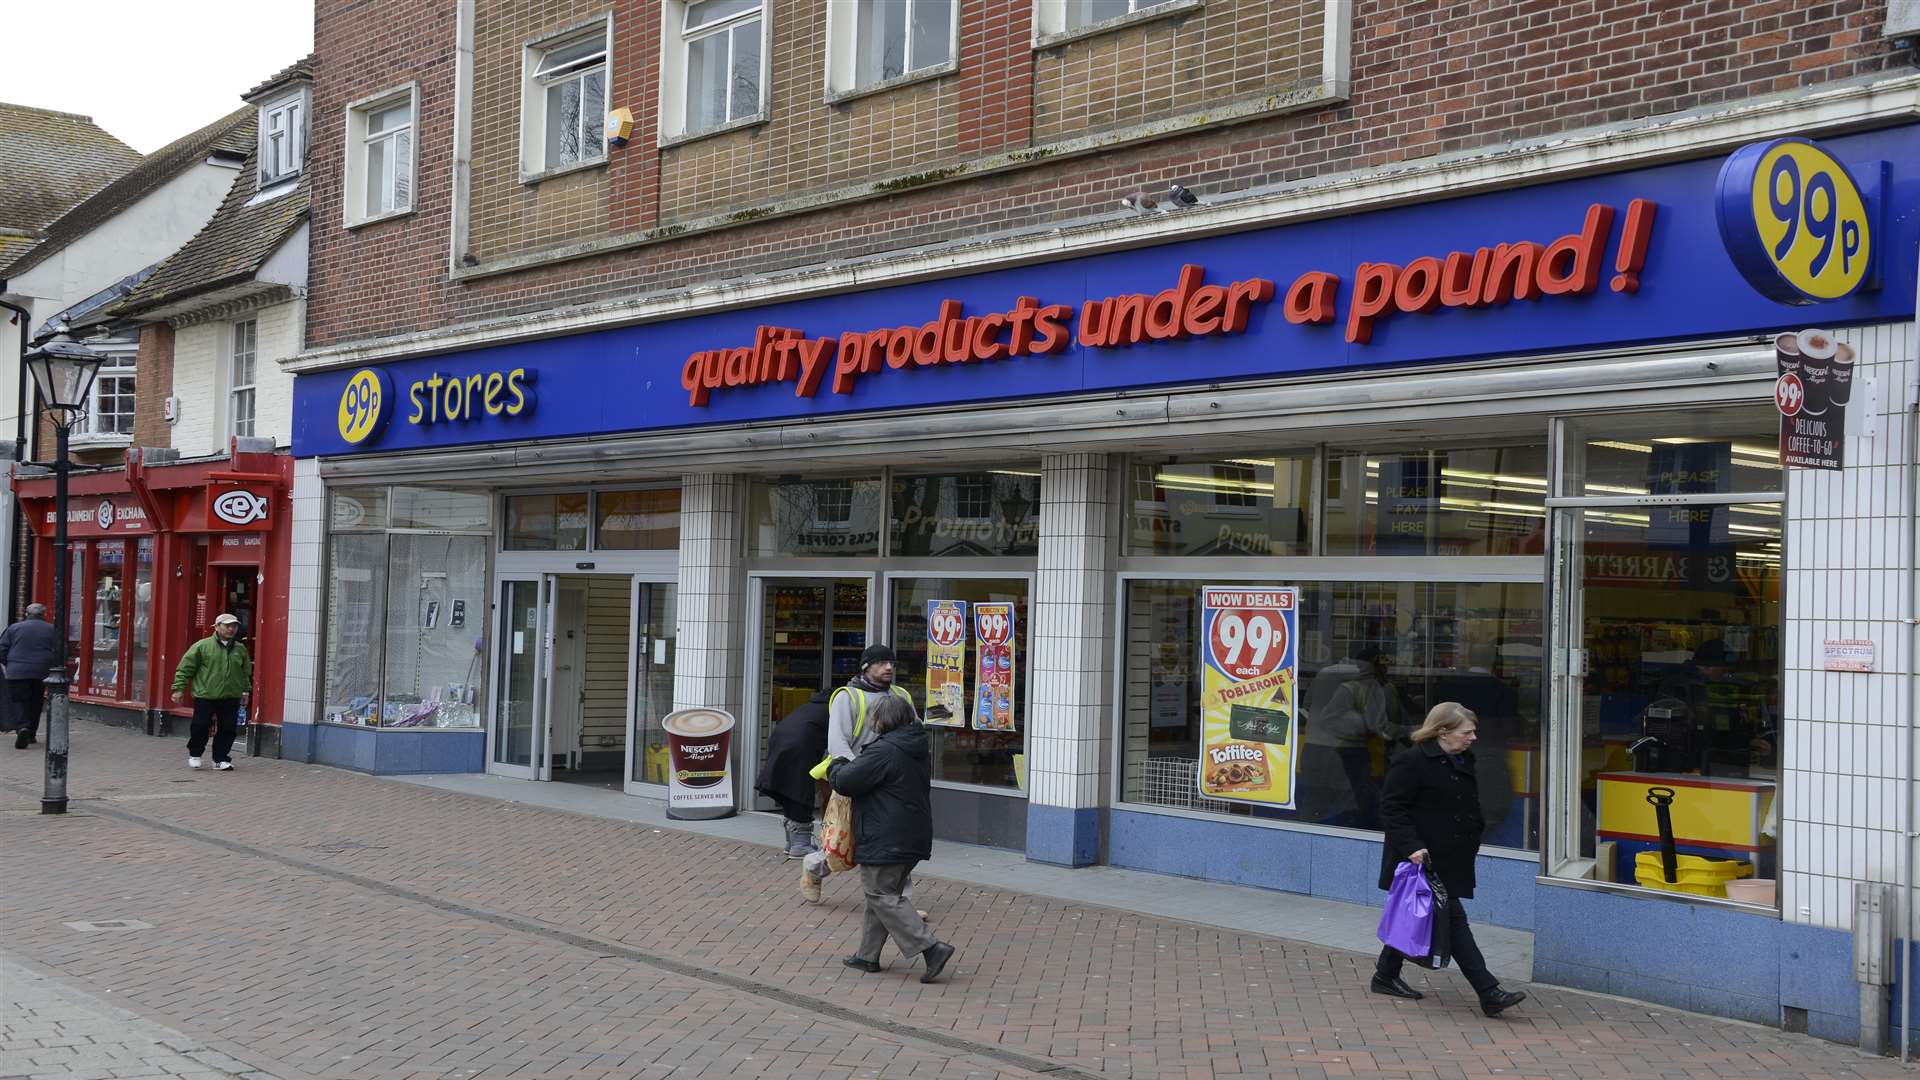 The shop reopened as a 99p Store in 2009